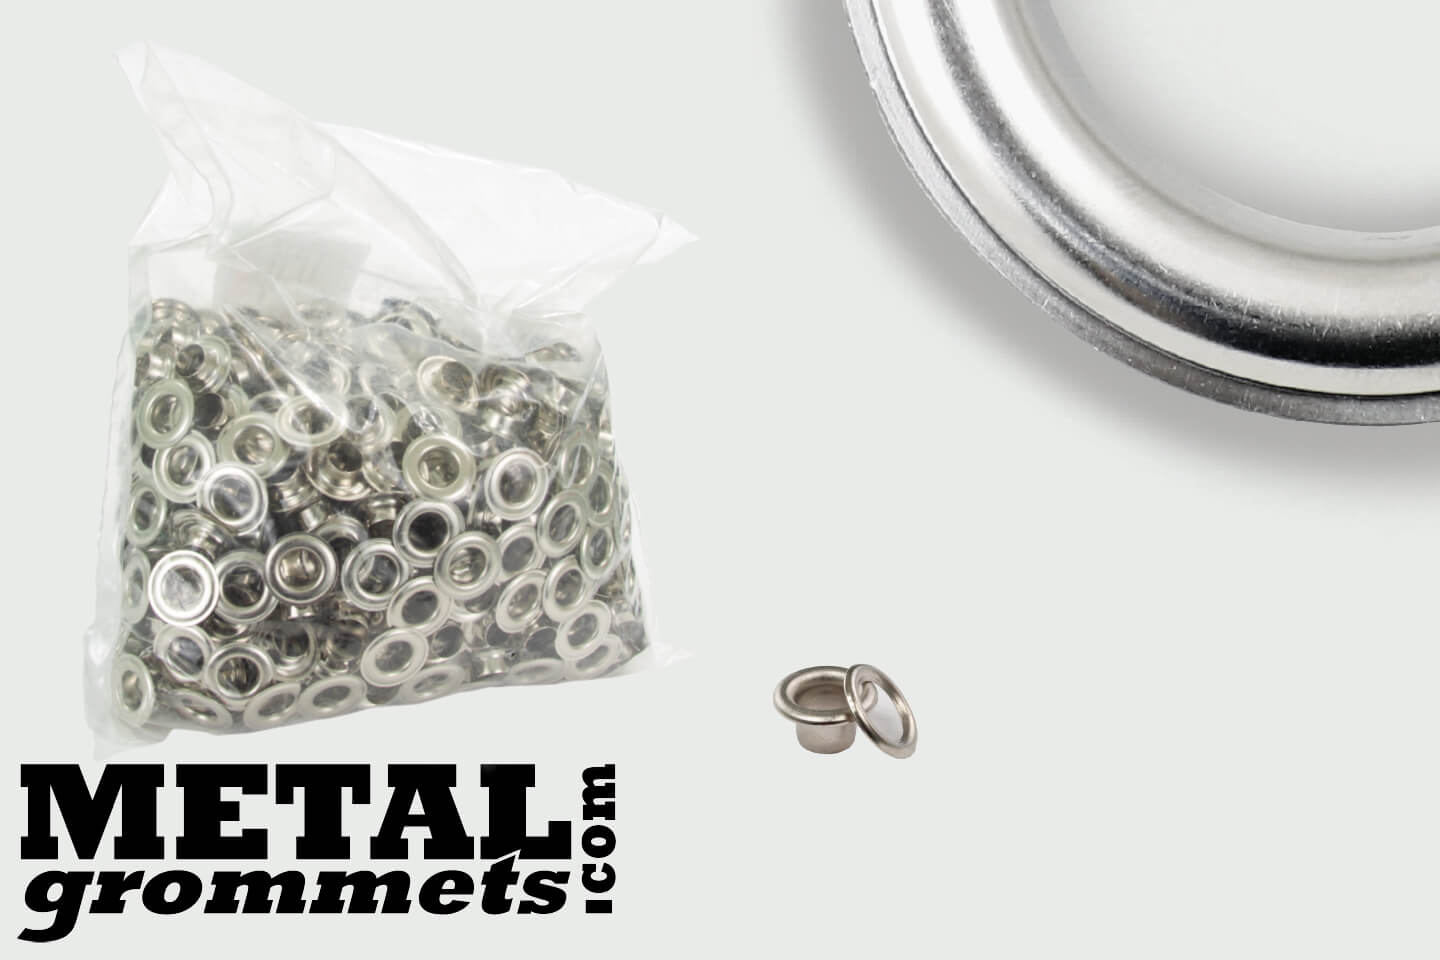 #00 (3/16 - 0.1875 Hole Size) Nickel Plated Grommets & Washers